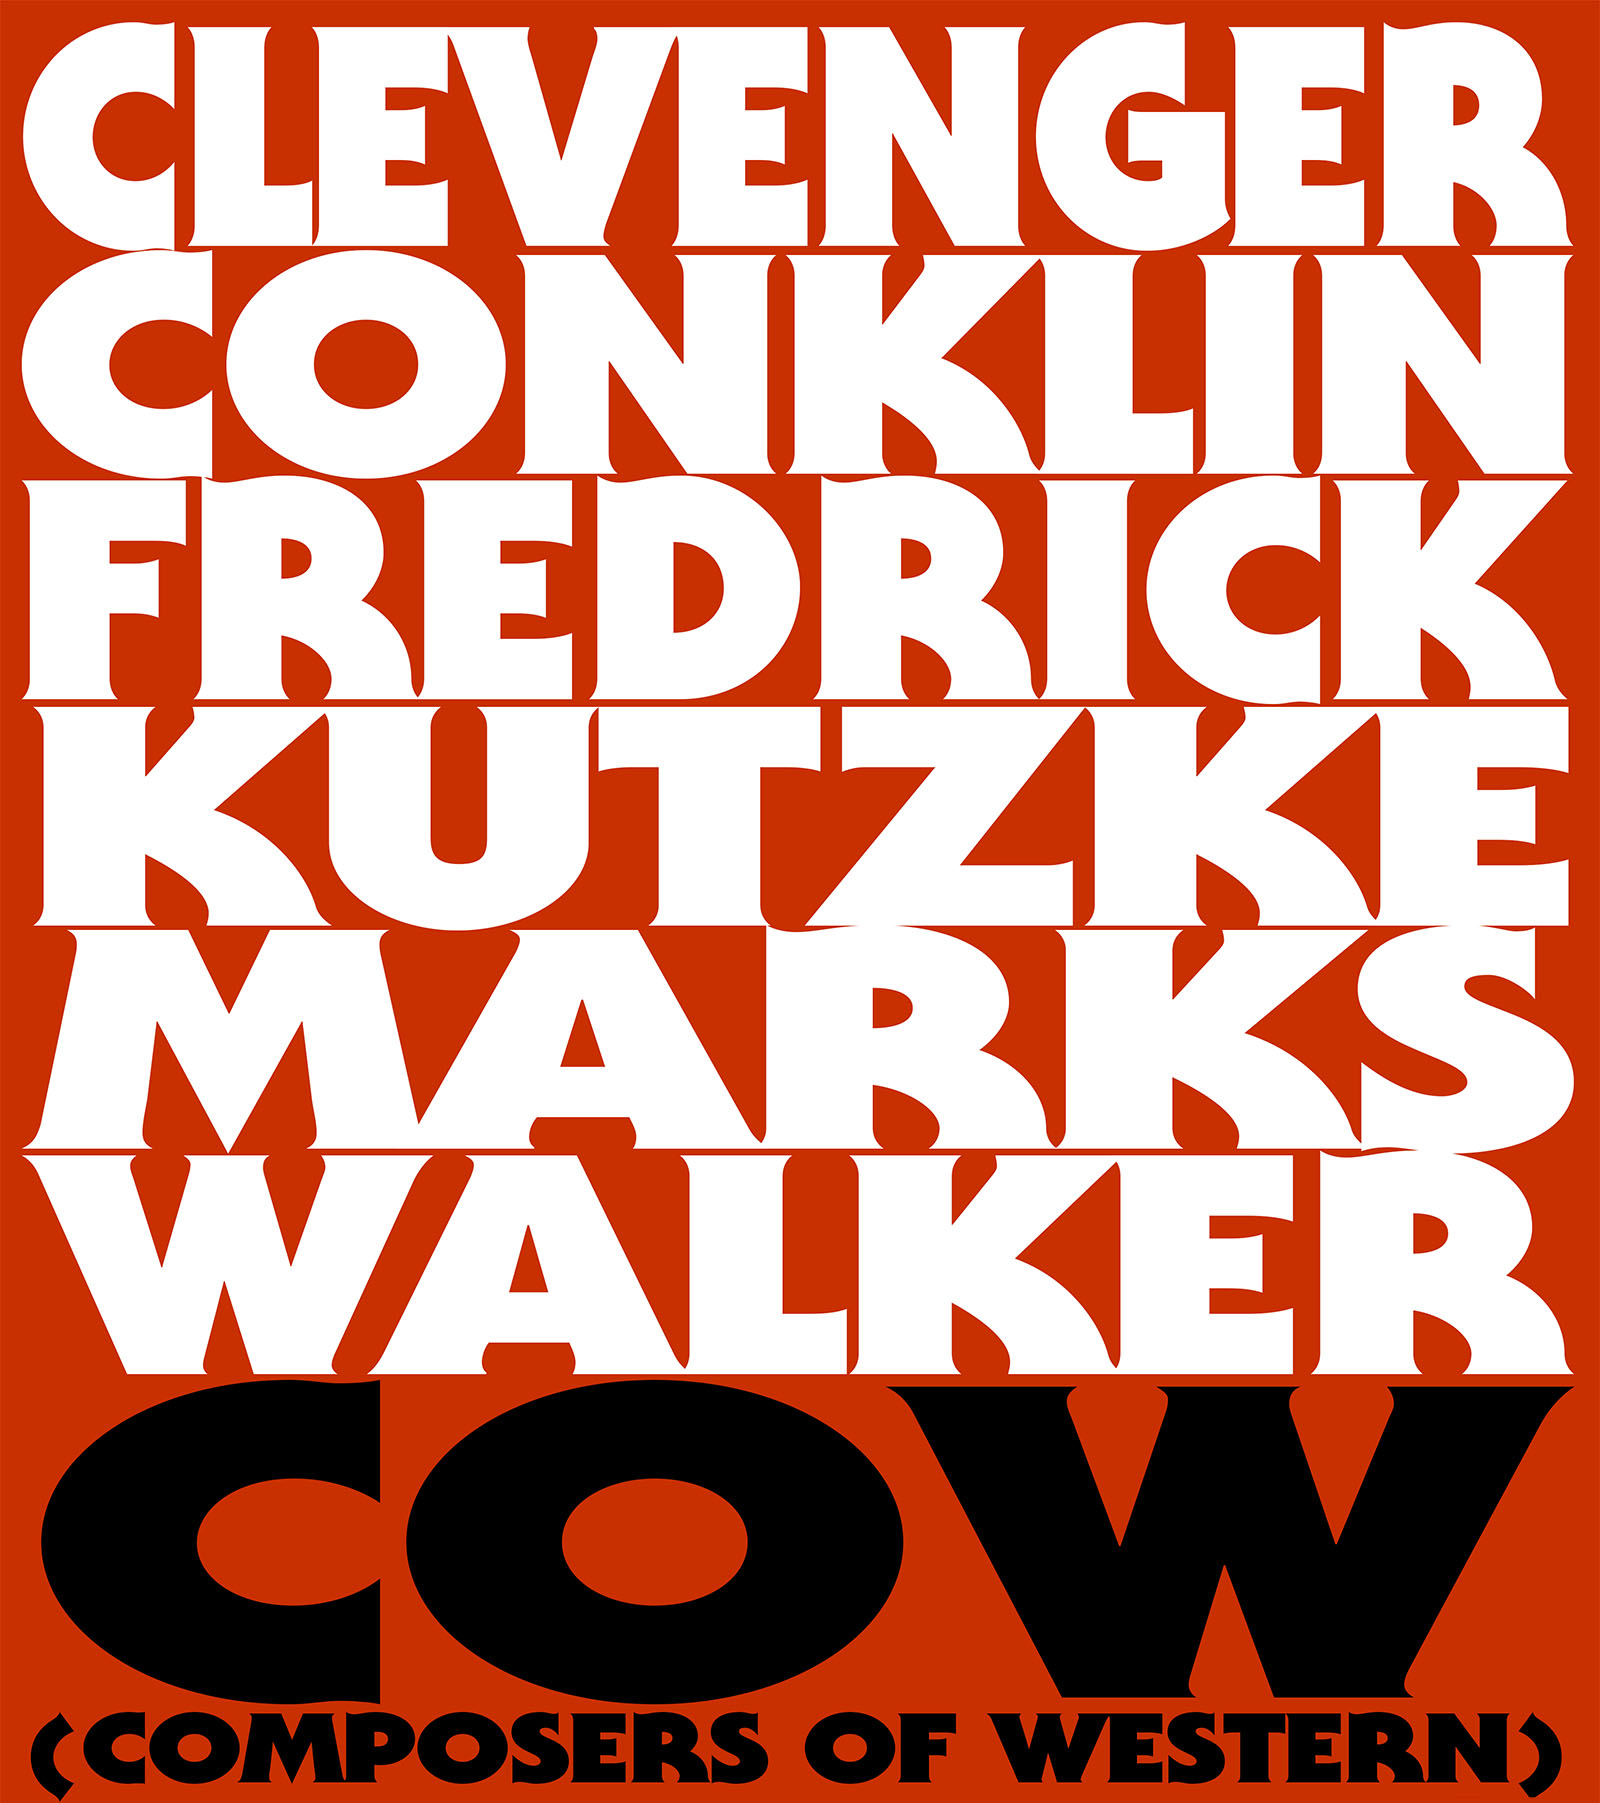 big fat letters with composers names and the letters COW underneath